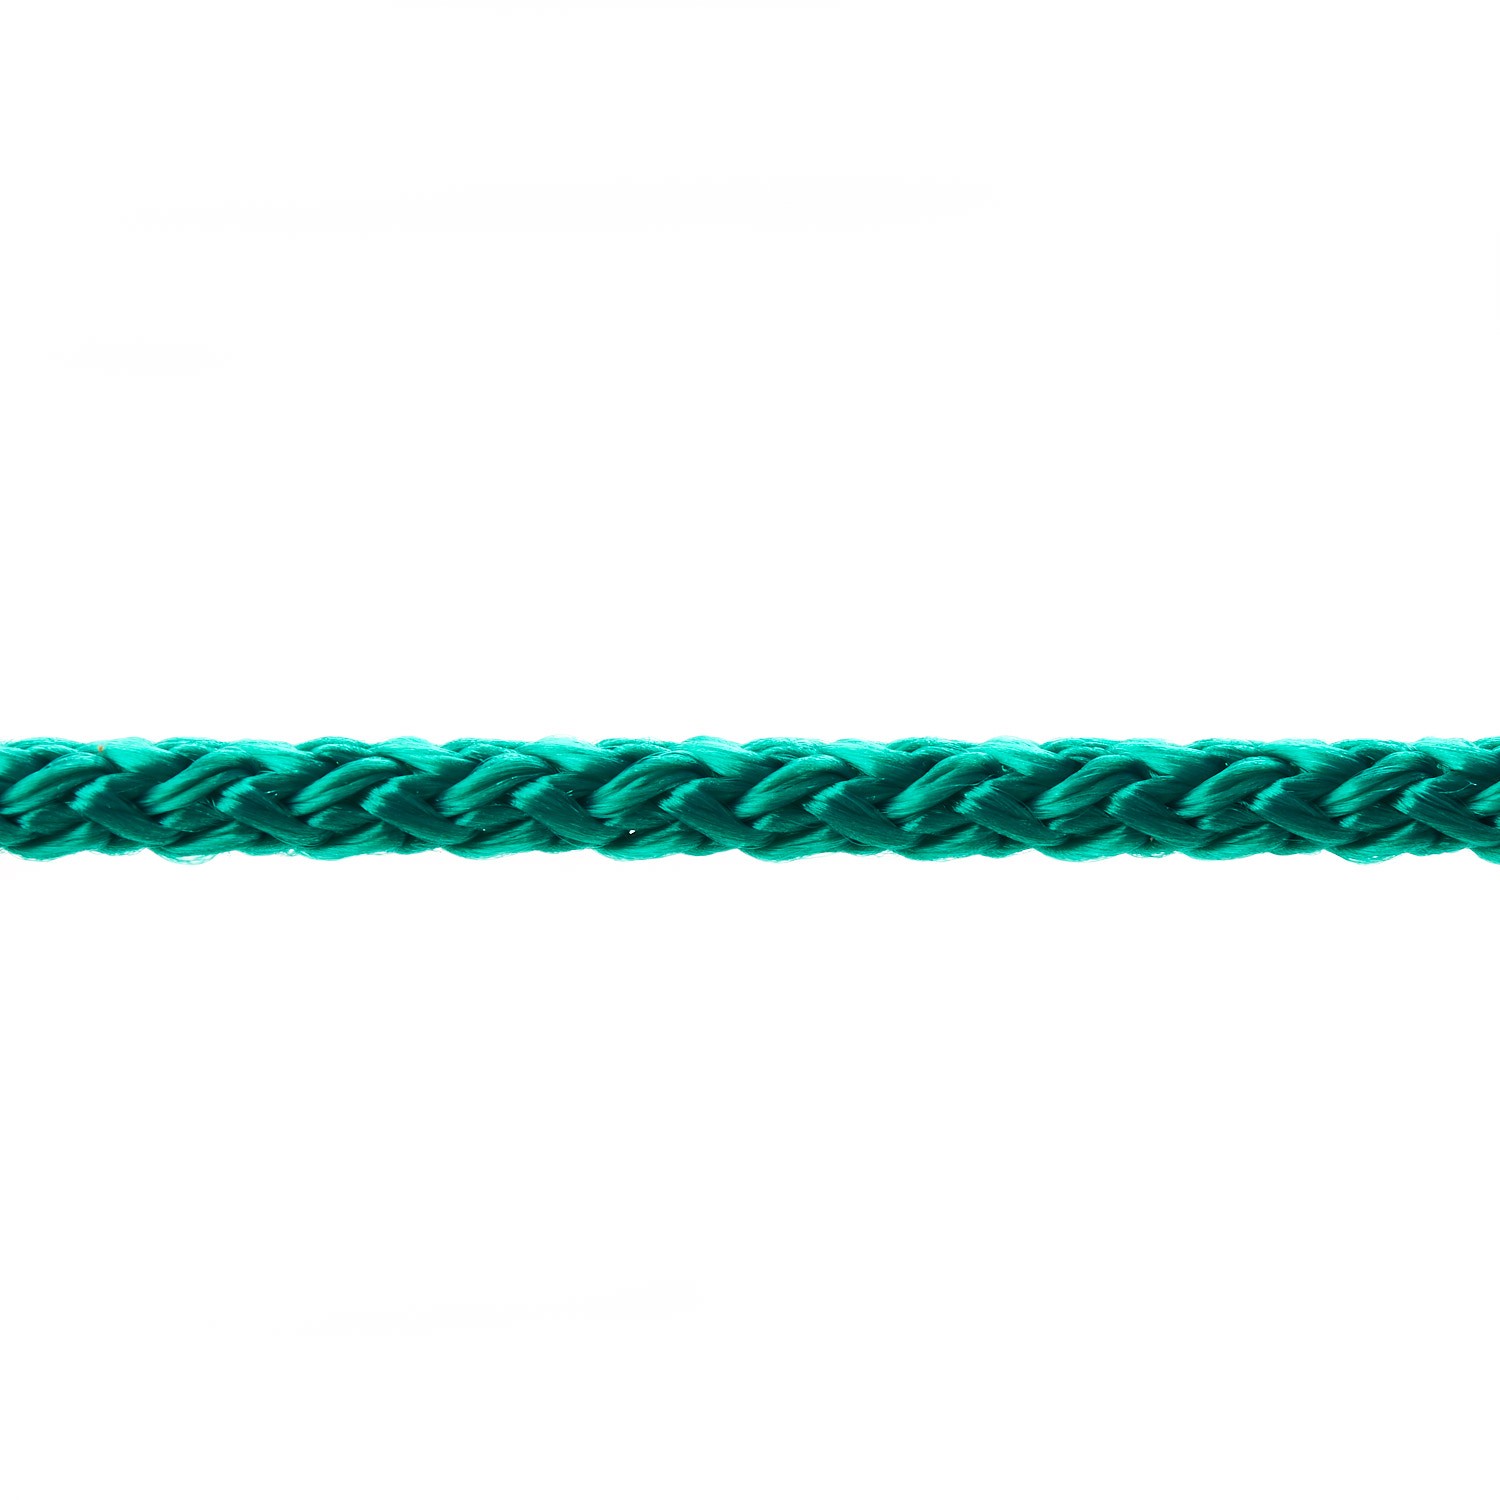 Emerald Green KC5 5mm Round Knitted Cord Detail Kalsi Cords